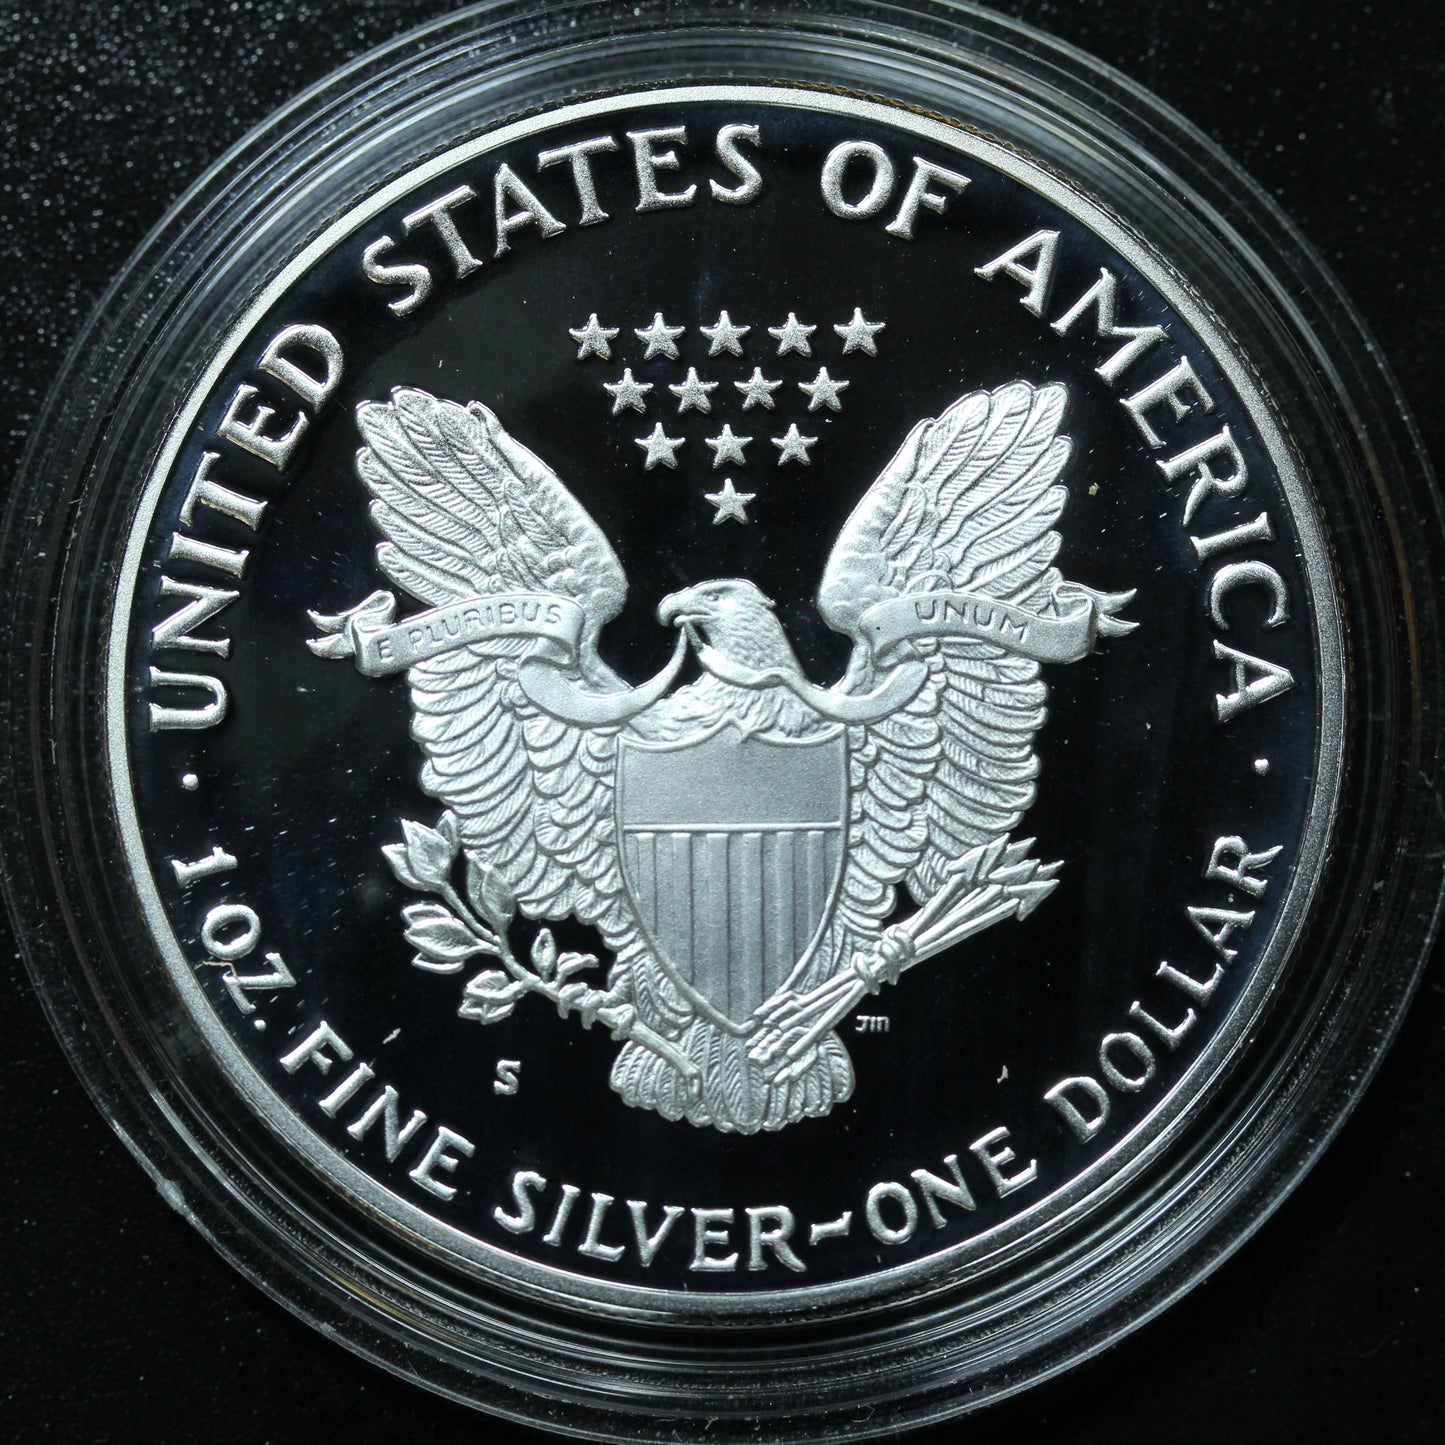 1986 S Proof Silver American Eagle 1 oz Coin Only w/ Capsule